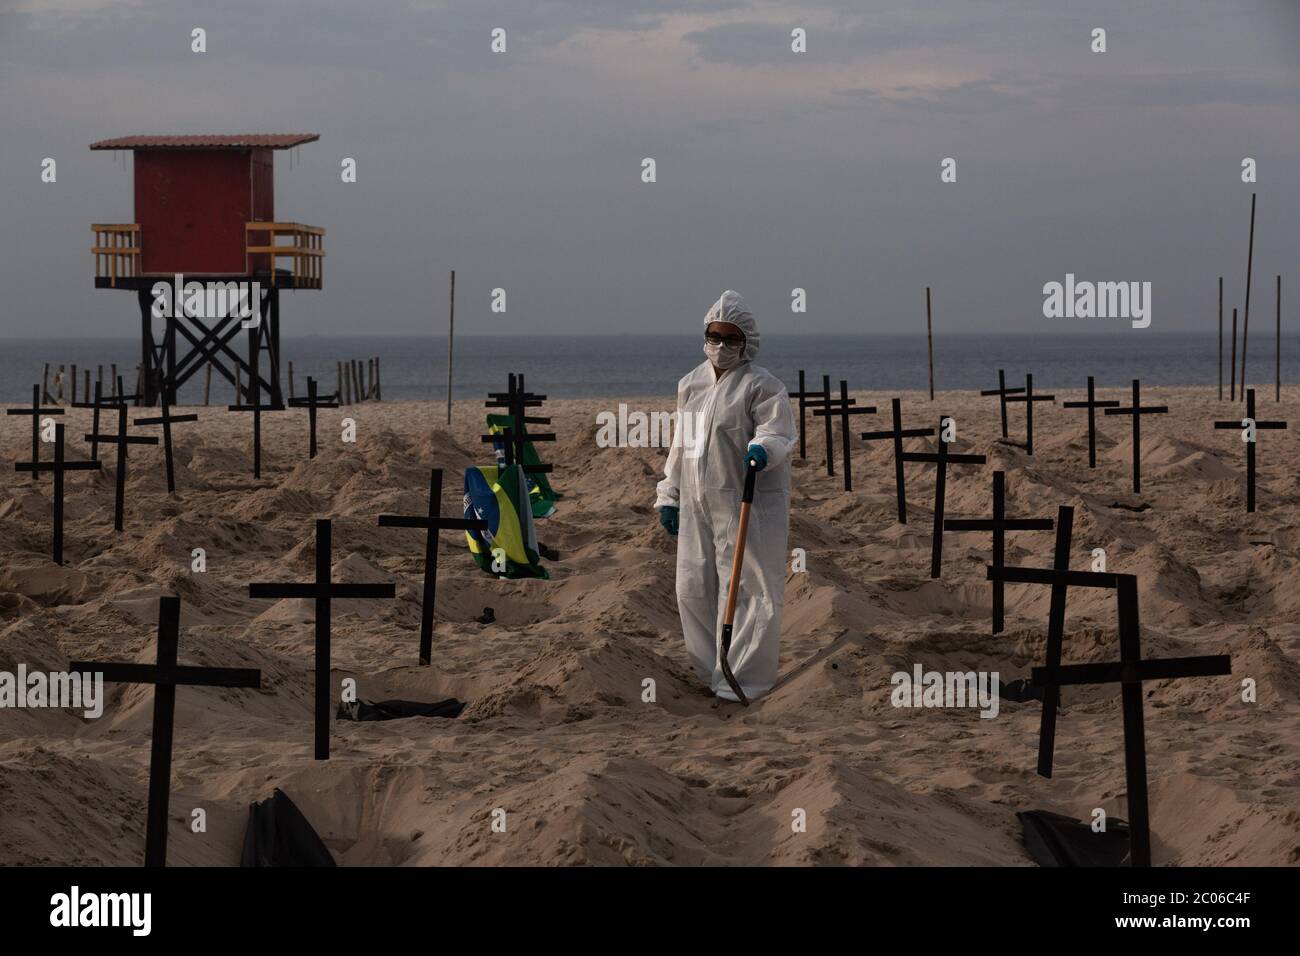 Rio De Janeiro, Brazil. 11th June, 2020. An activist of the NGO Rio de Paz in a protective suit digs graves on Copacabana beach to symbolize the Corona victims in a protest against the government's handling of the crisis. Brazil is the most affected country in Latin America by the corona virus pandemic. Credit: Ian Cheibub/dpa/Alamy Live News Stock Photo